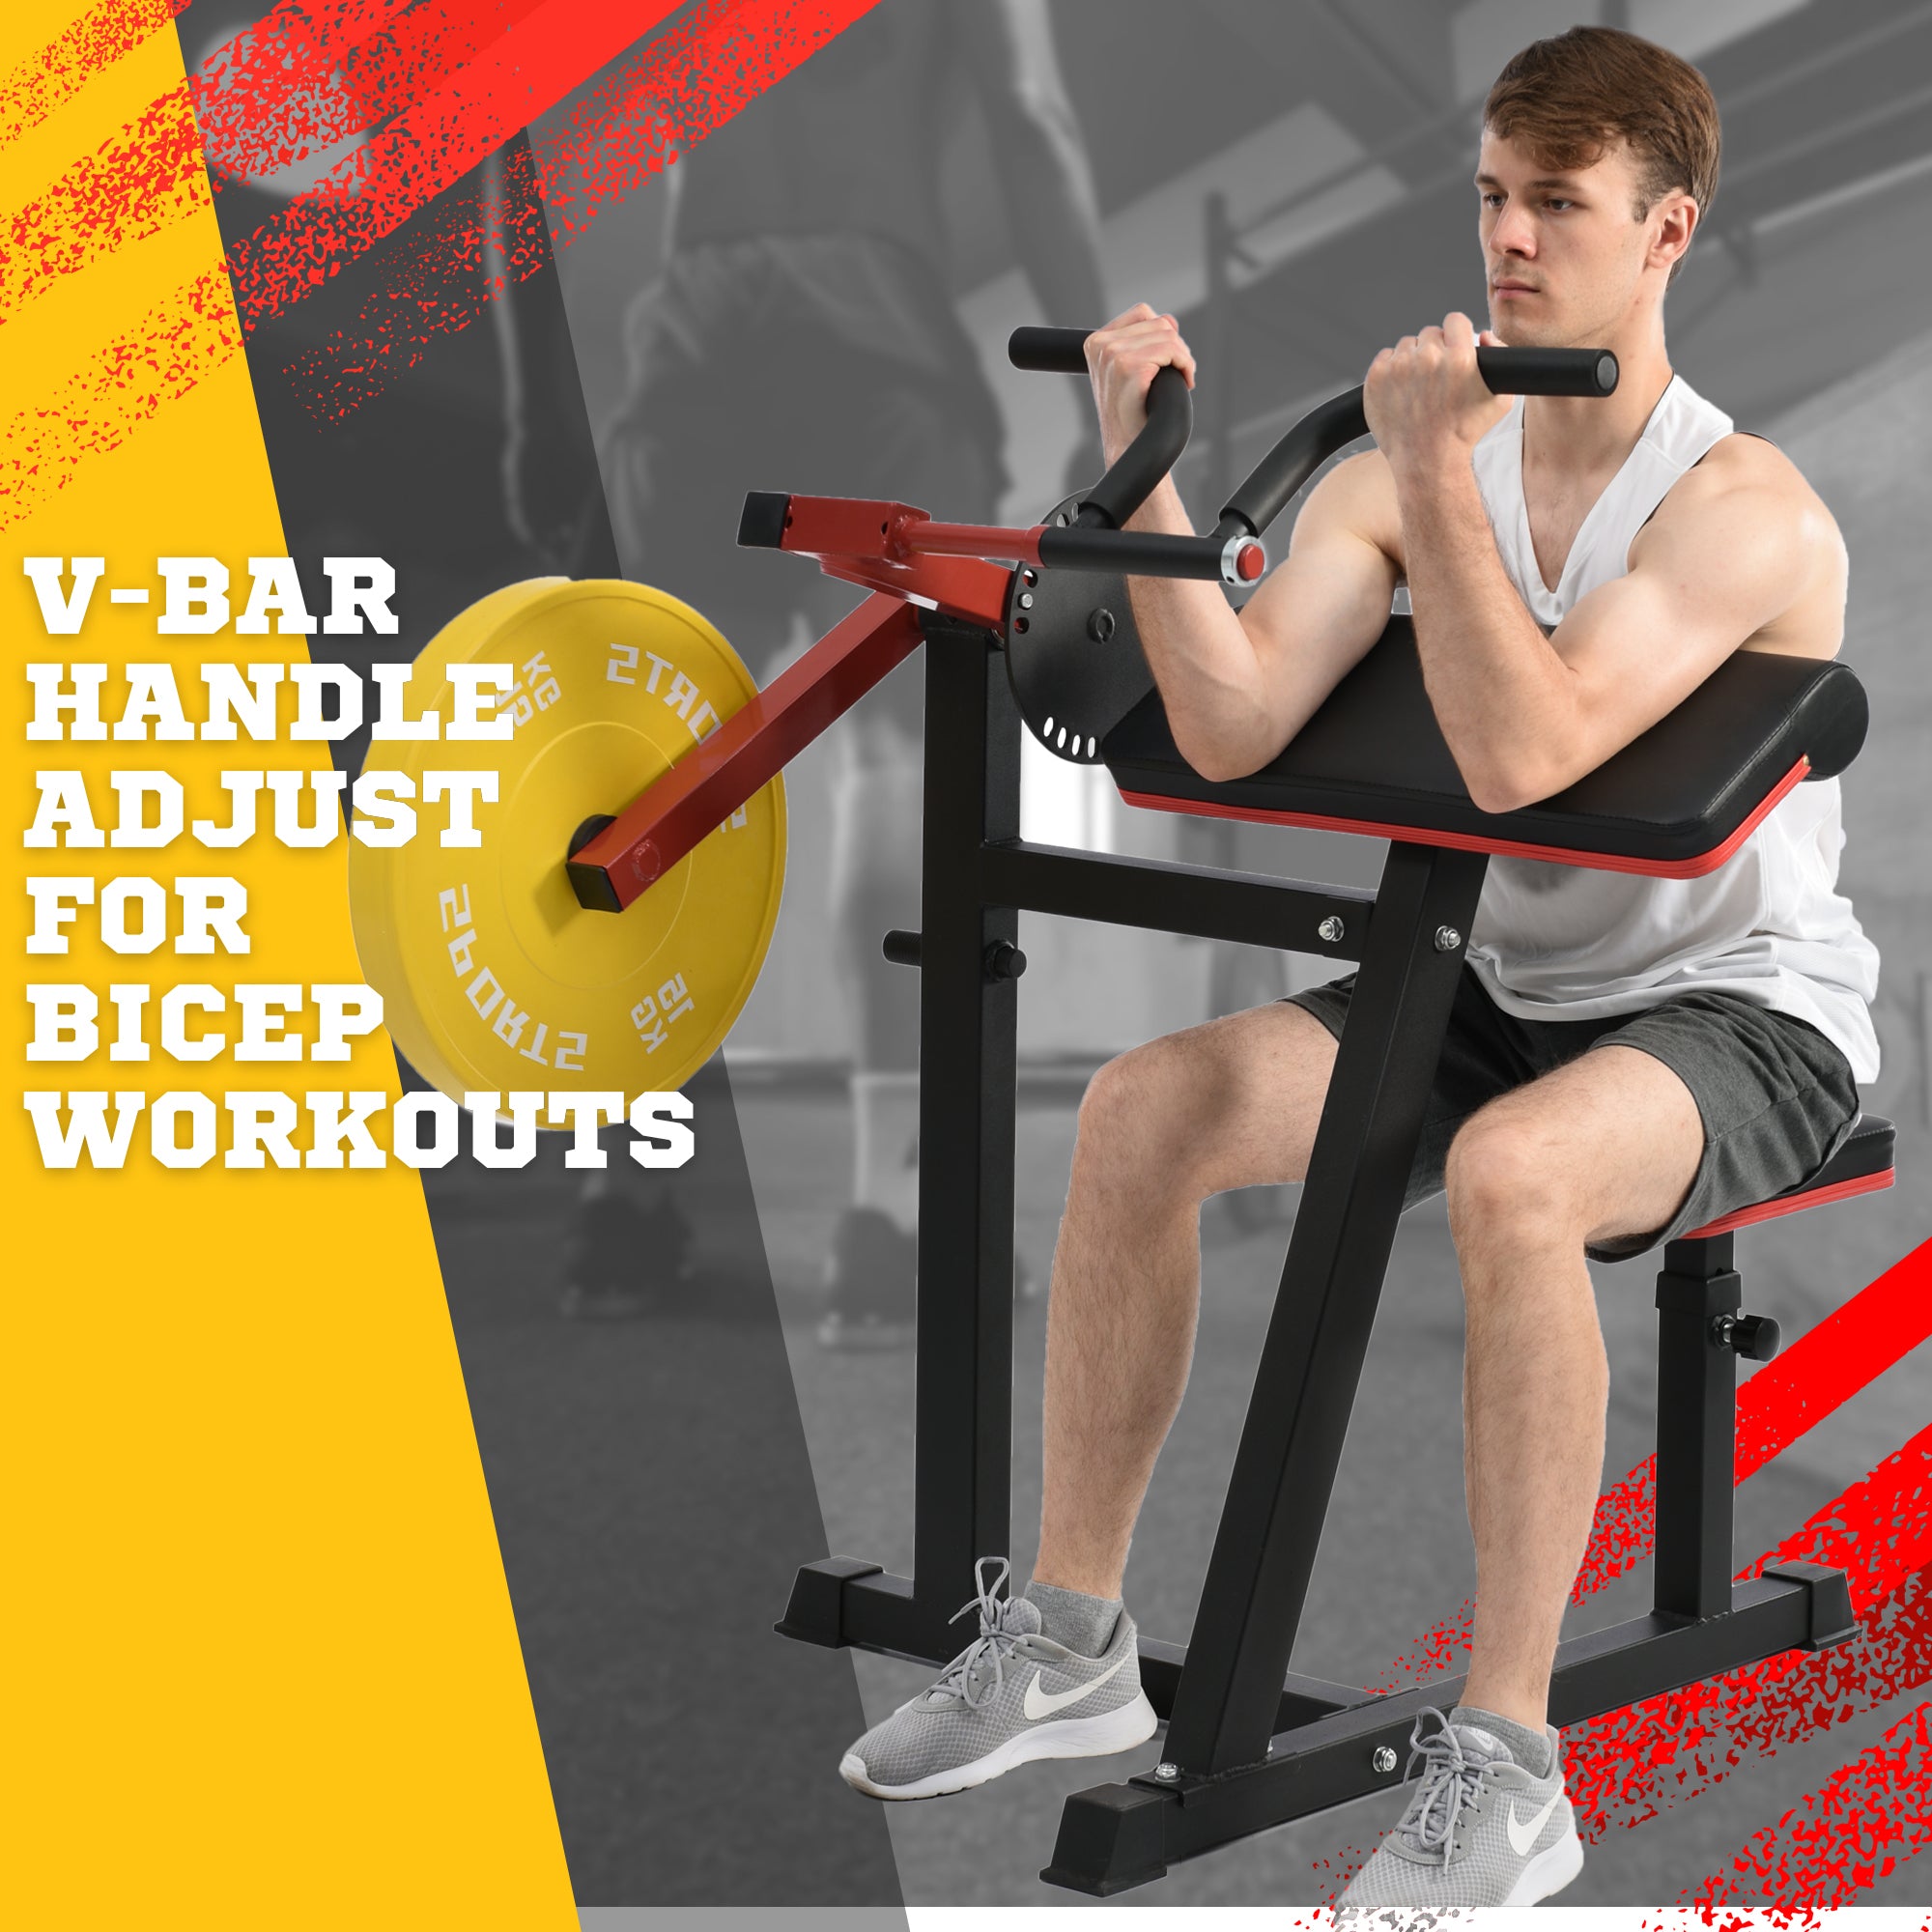 Bicep Tricep Curl Machine with Adjustable Seat,